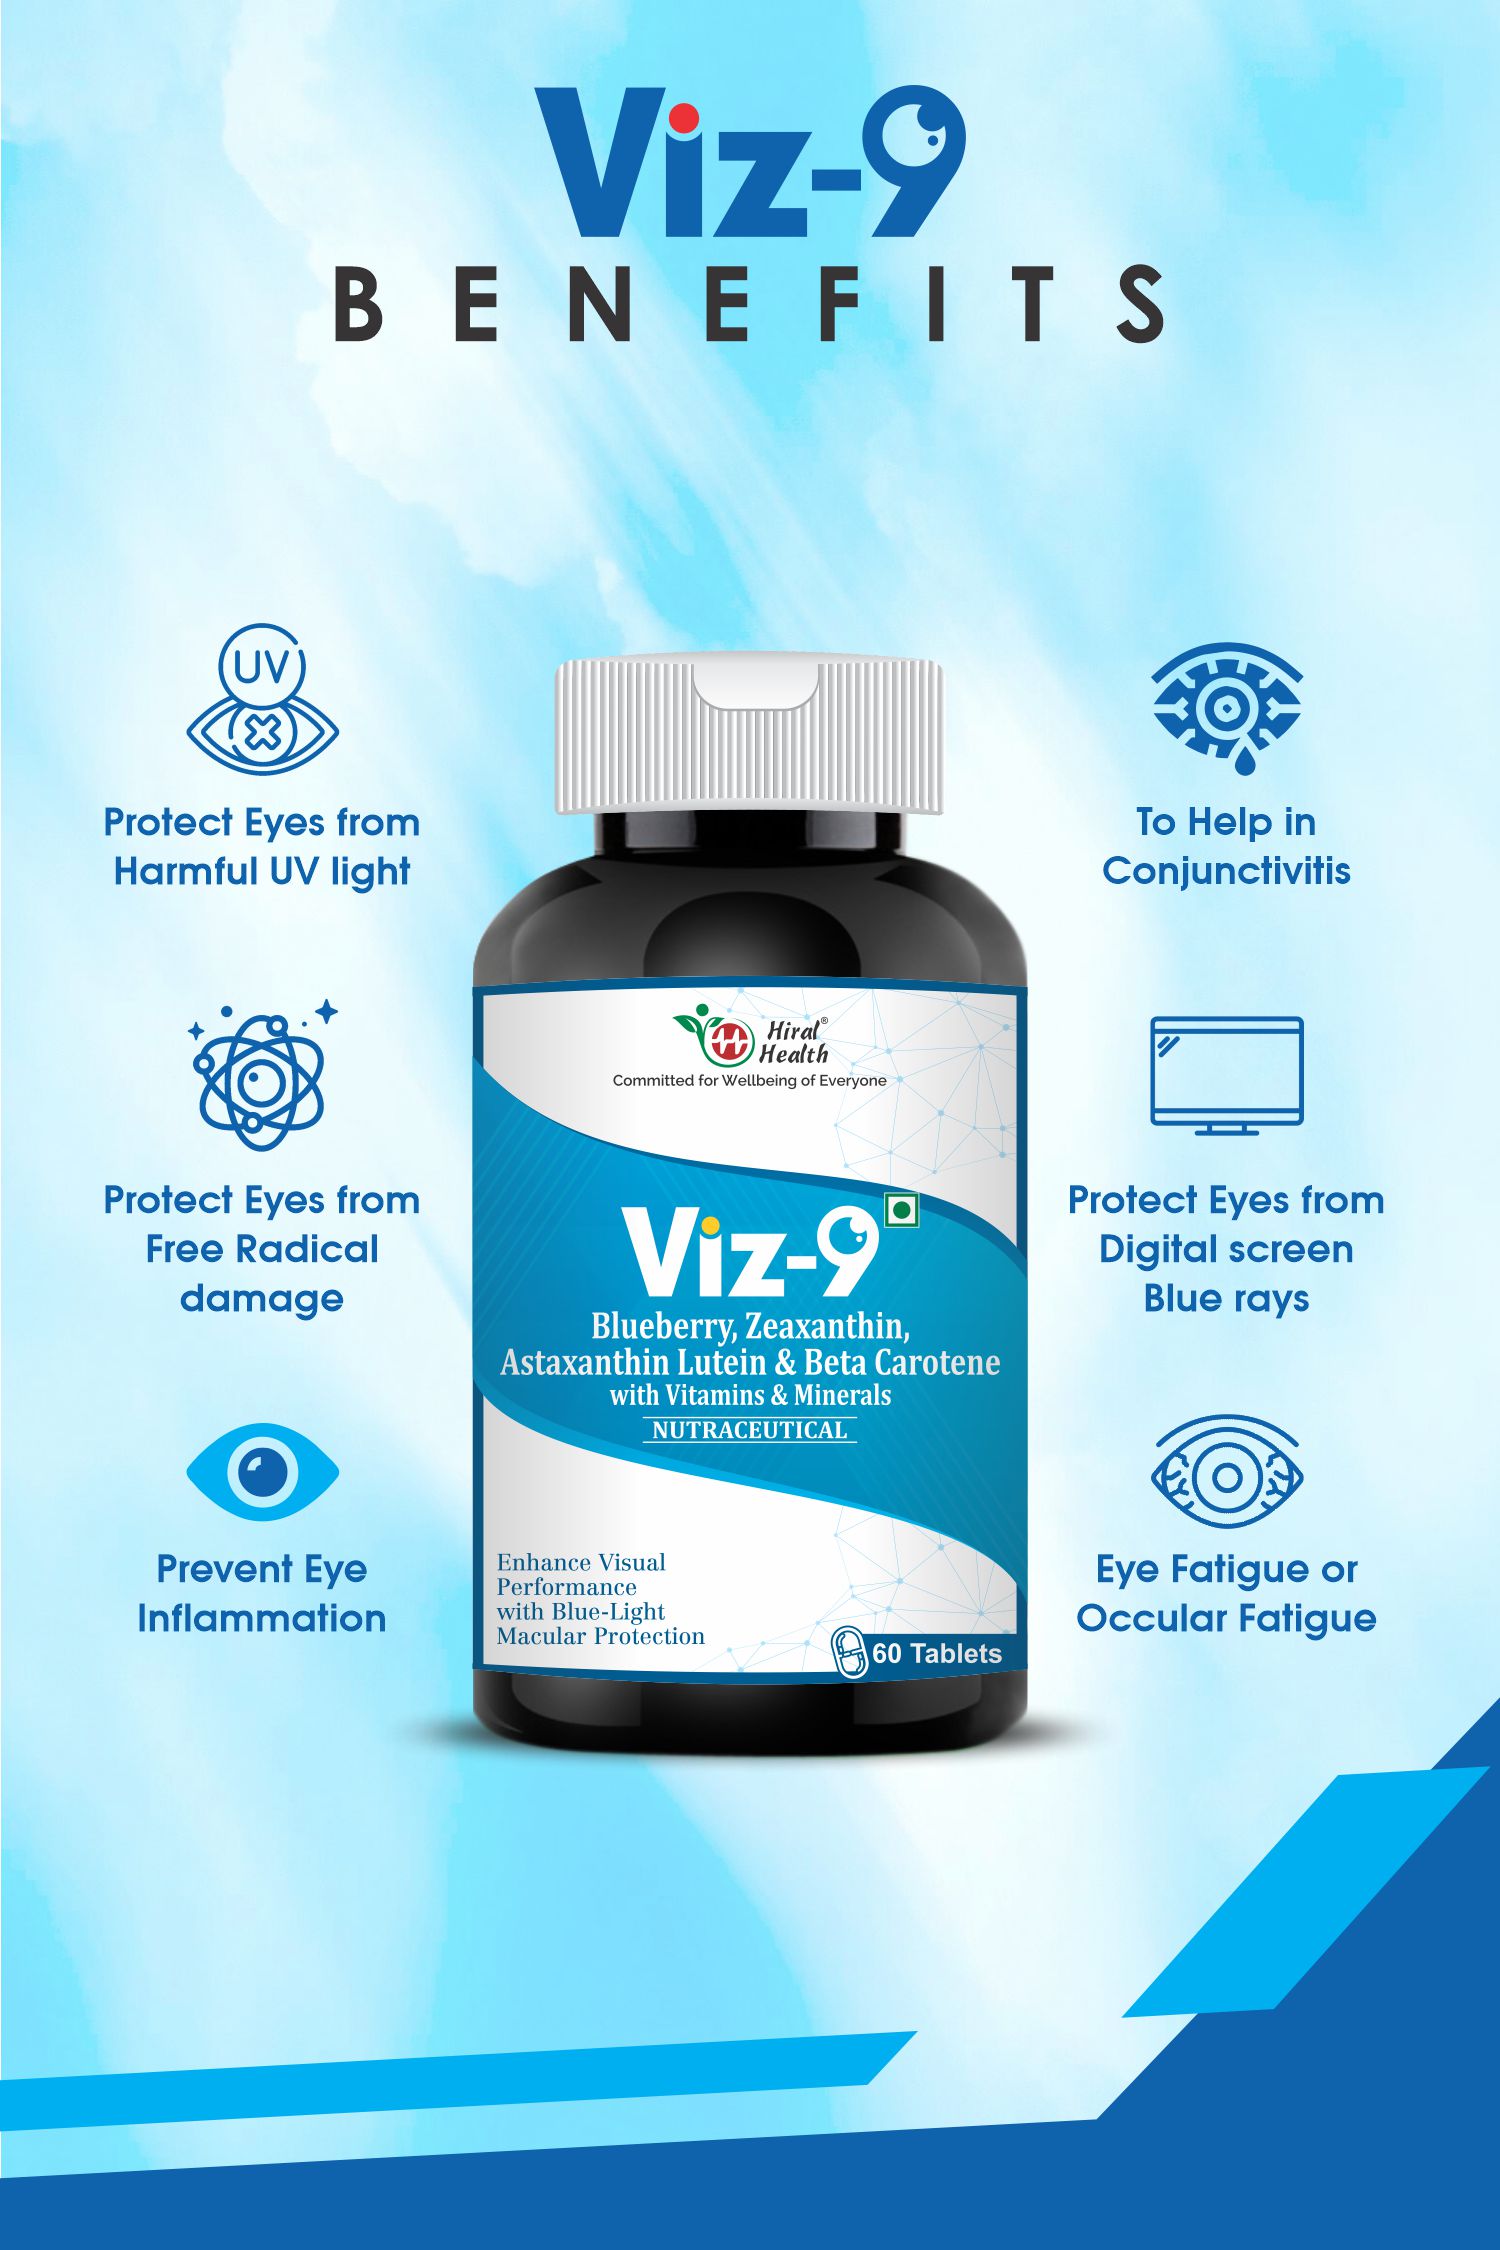 viz9 tablet with its benefits represent in icon. www.hiralhealth.com